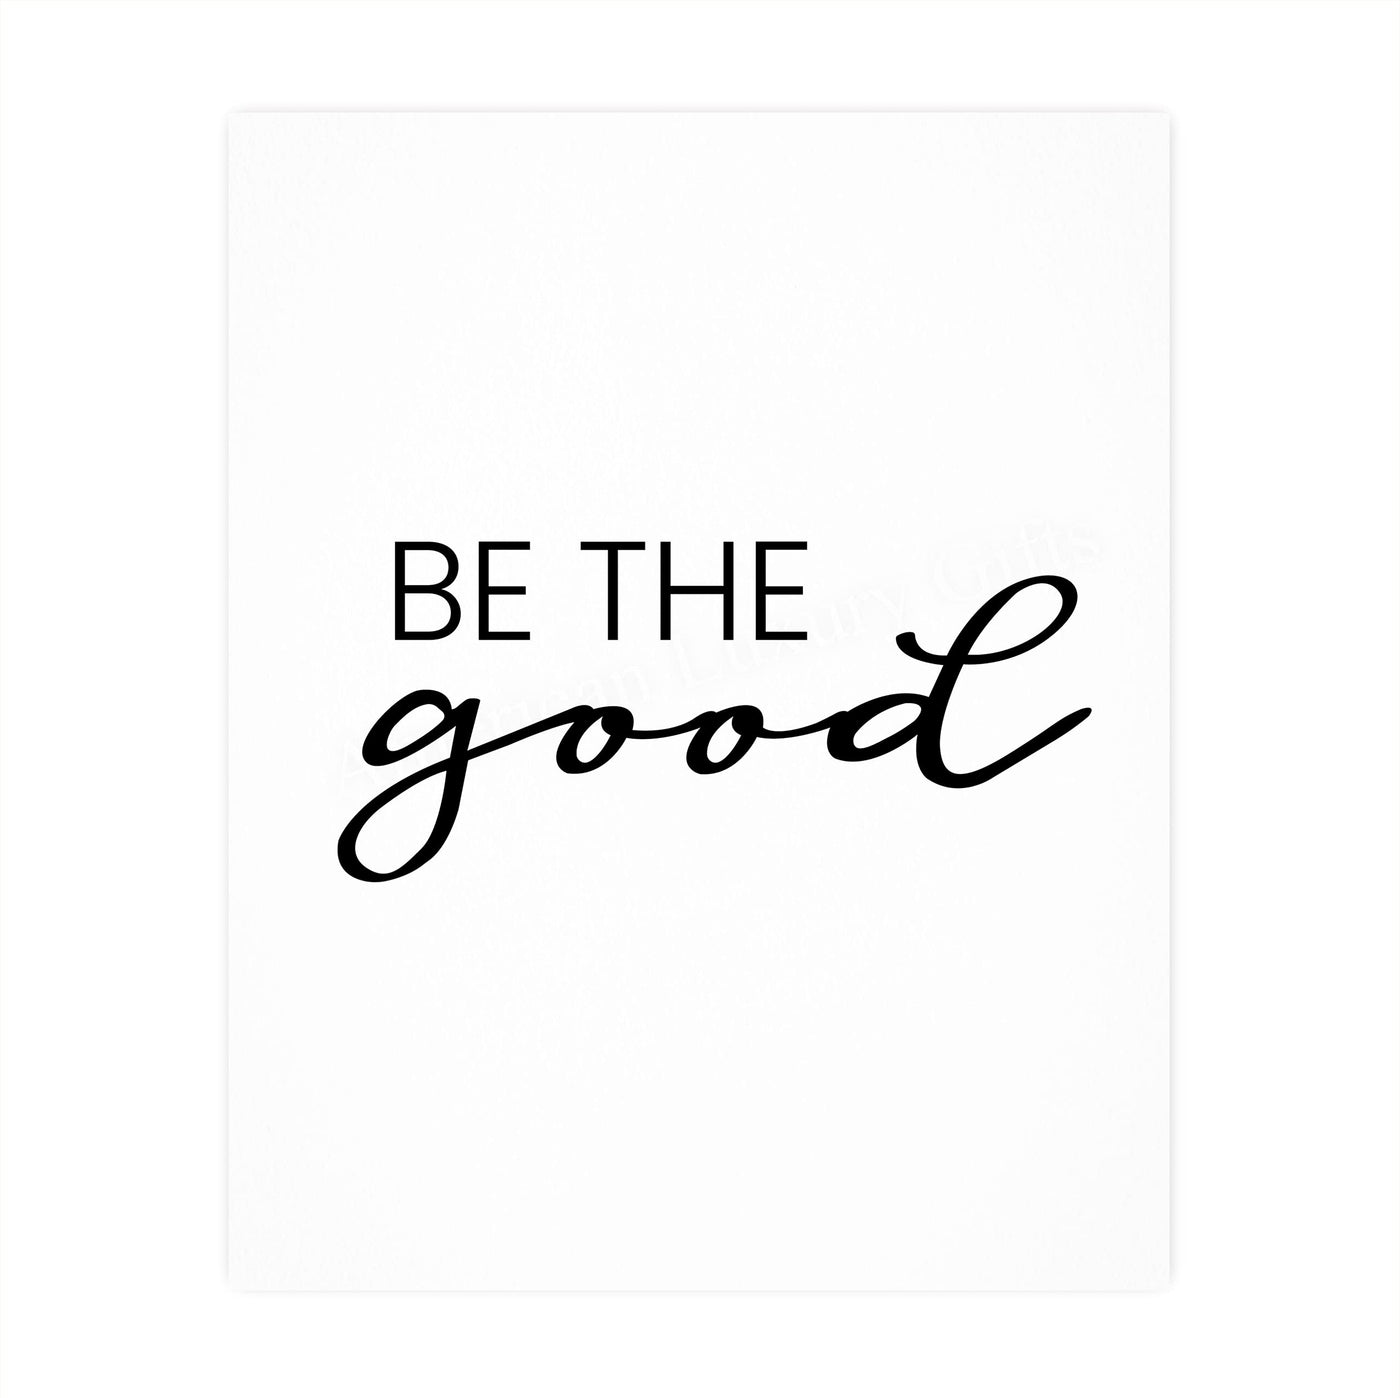 Be the Good Inspirational Quotes Wall Sign -8 x 10" Farmhouse Wall Art Print-Ready to Frame. Modern Typographic Design. Motivational Home-Office-Desk-School Decor. Great Gift for Inspiration!